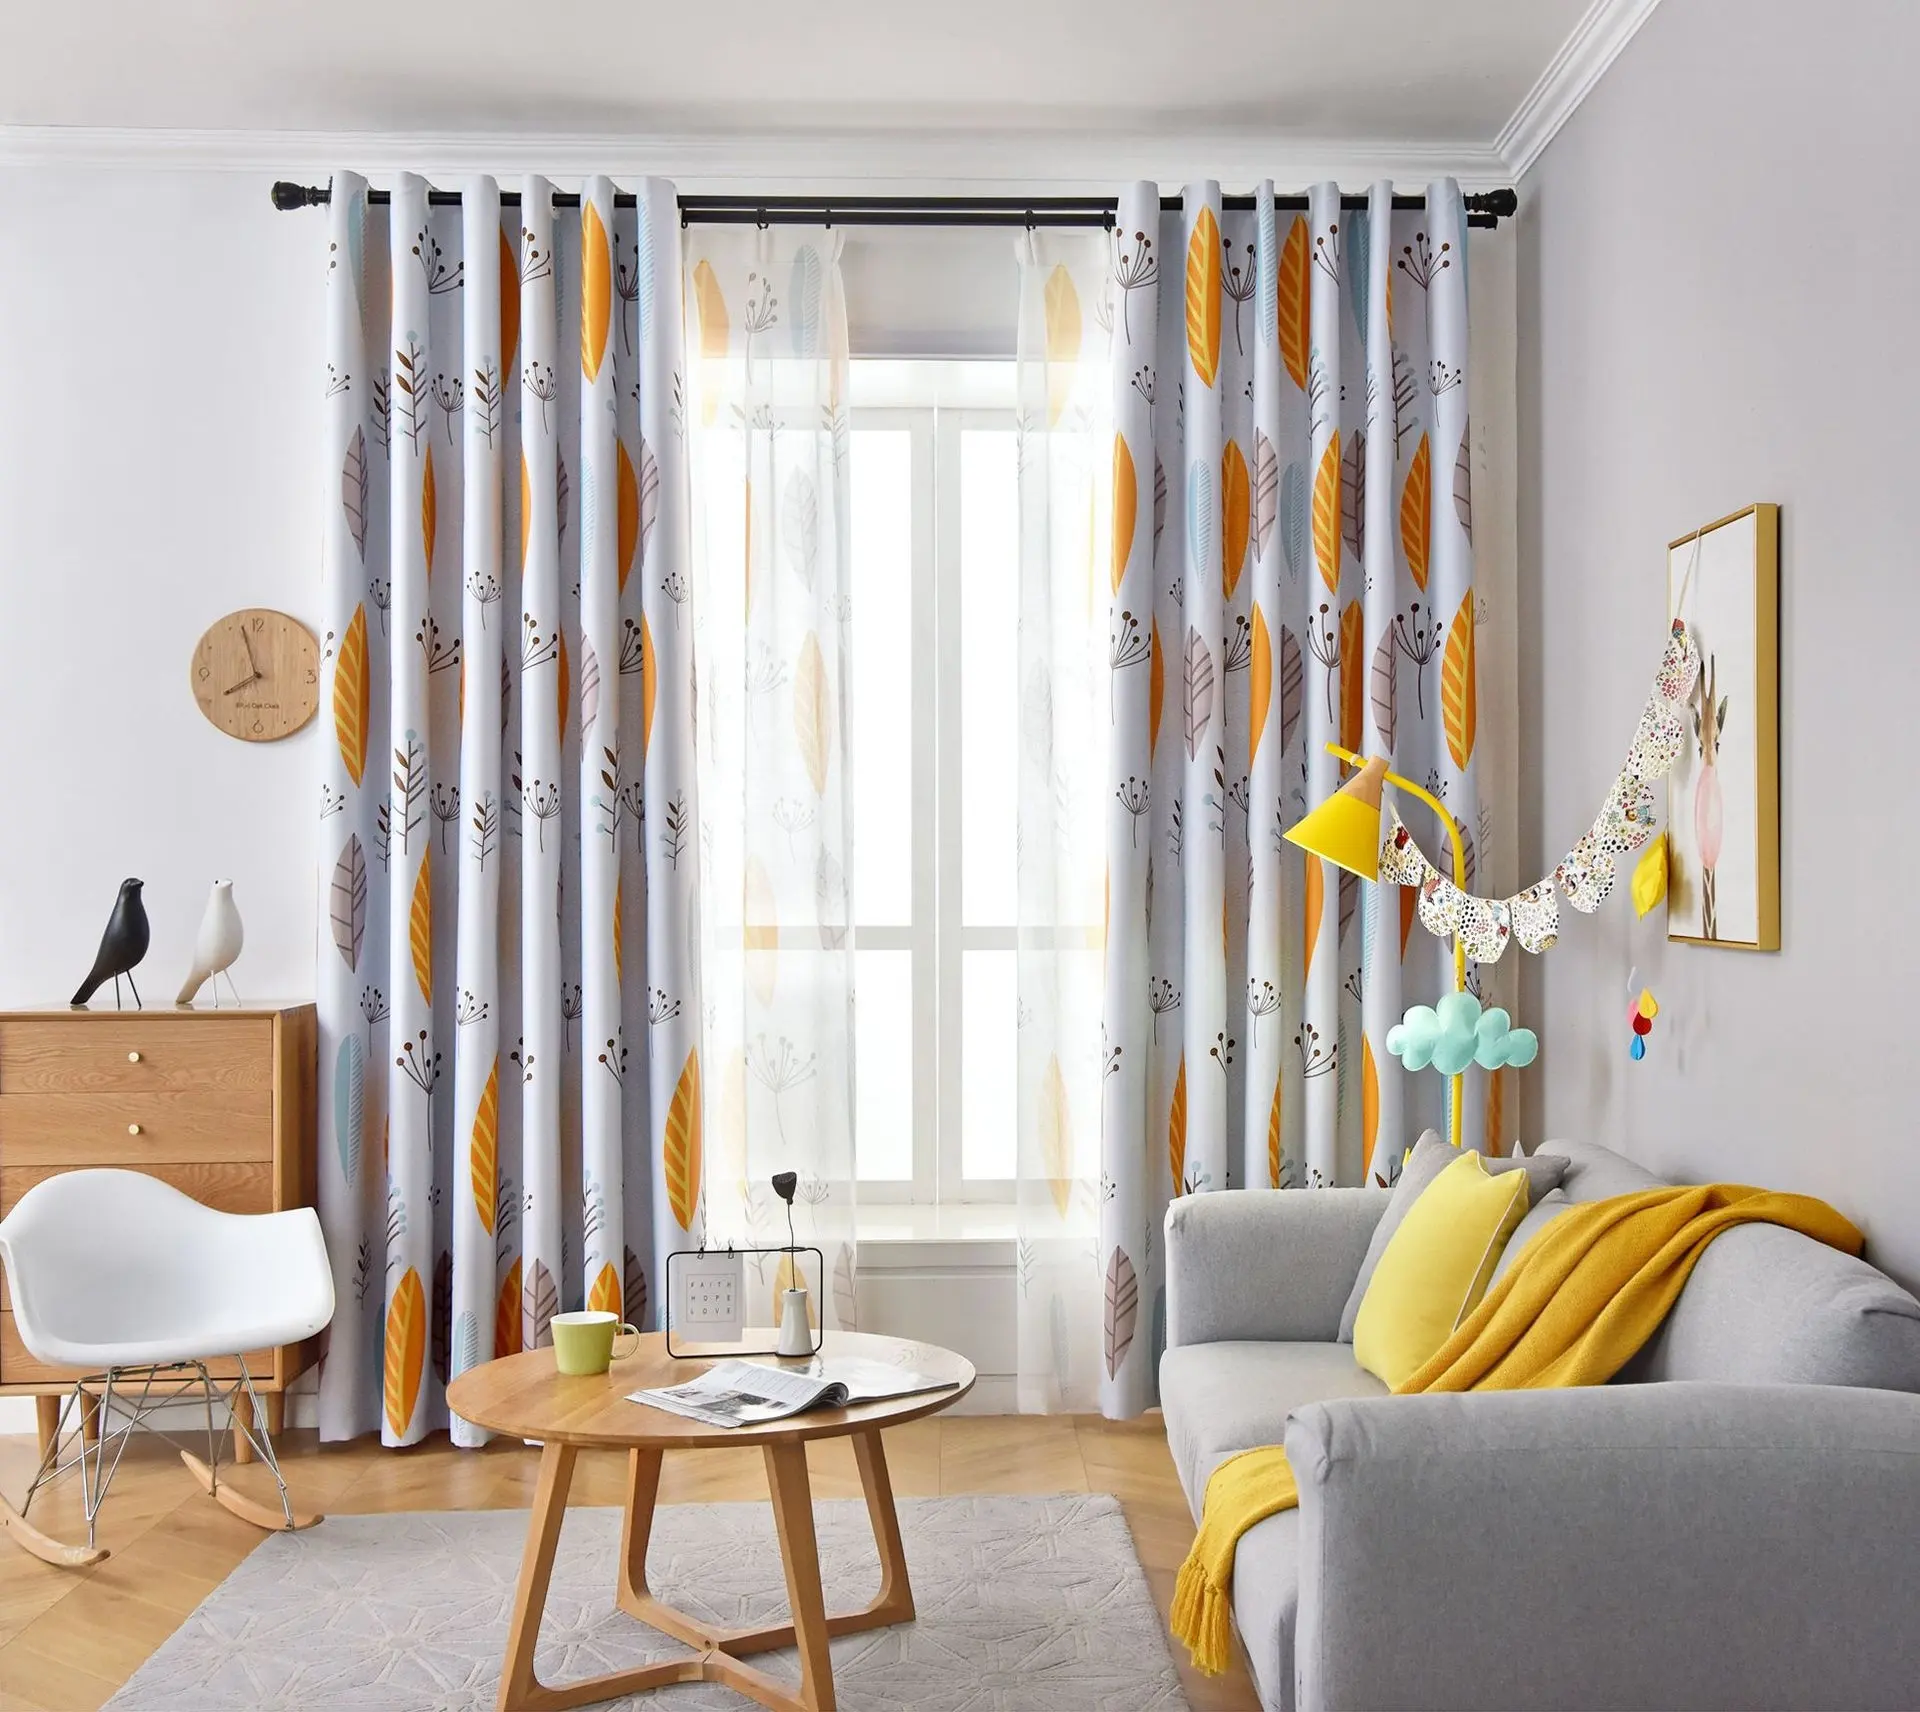 Hot Sale Modern Nordic Style Curtain Design Yellow Leaves Pattern Printed Blackout Curtains For Room Windows